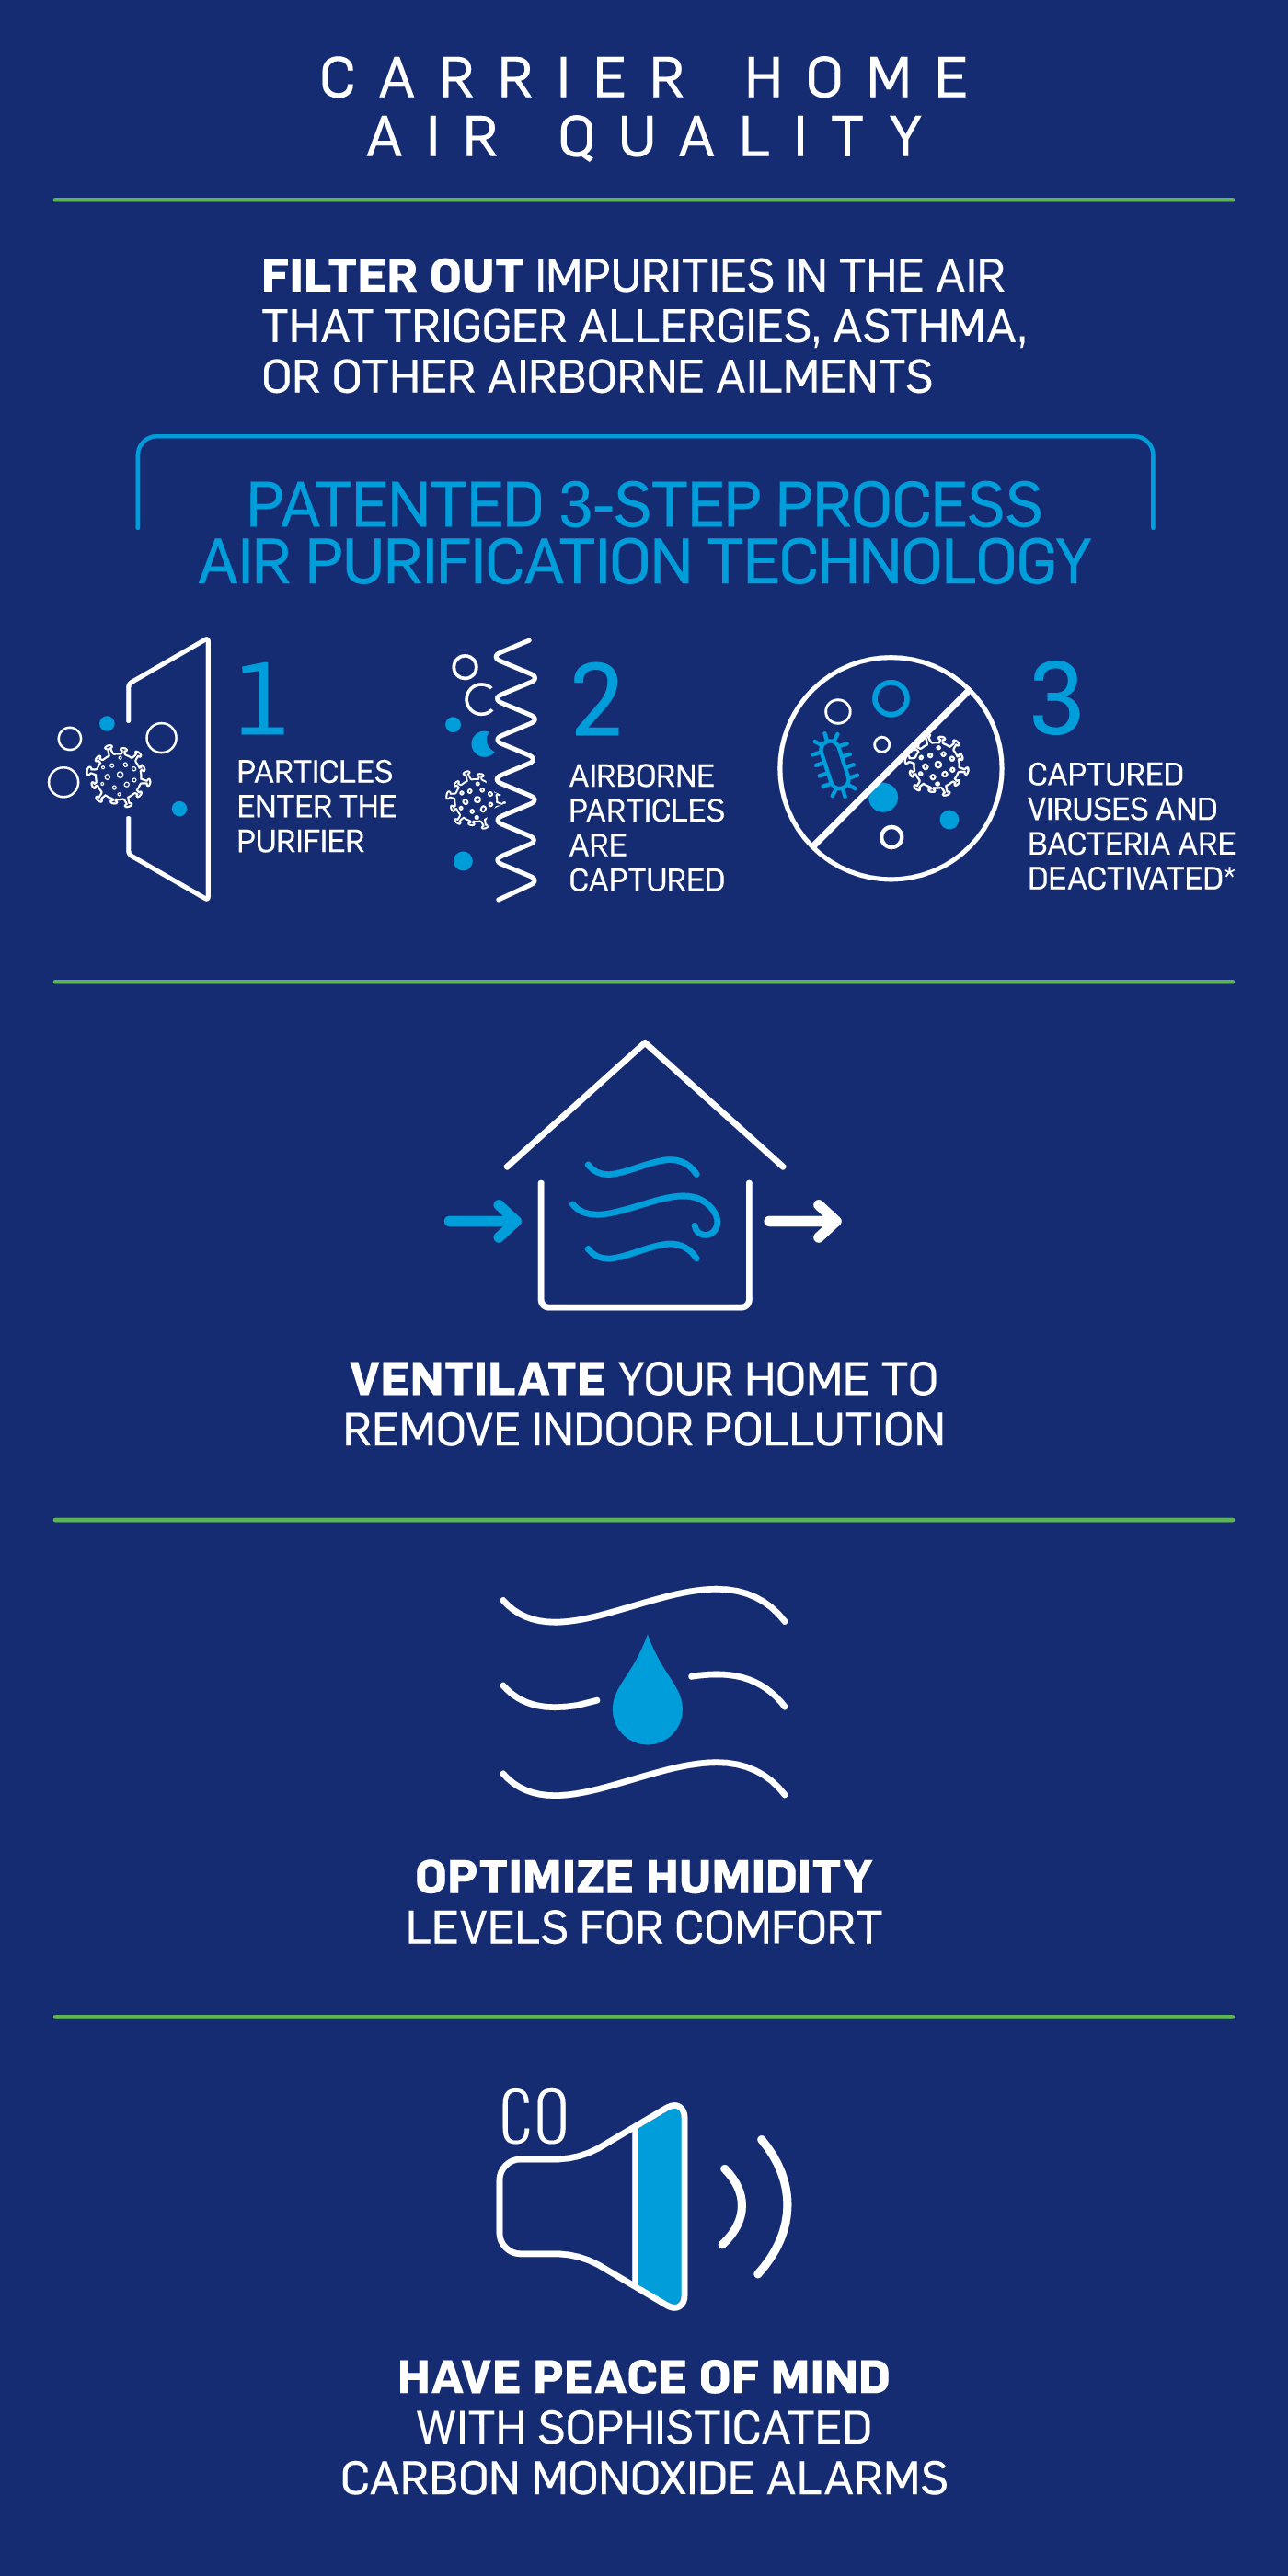 carrier-home-air-quality-infographic-mb